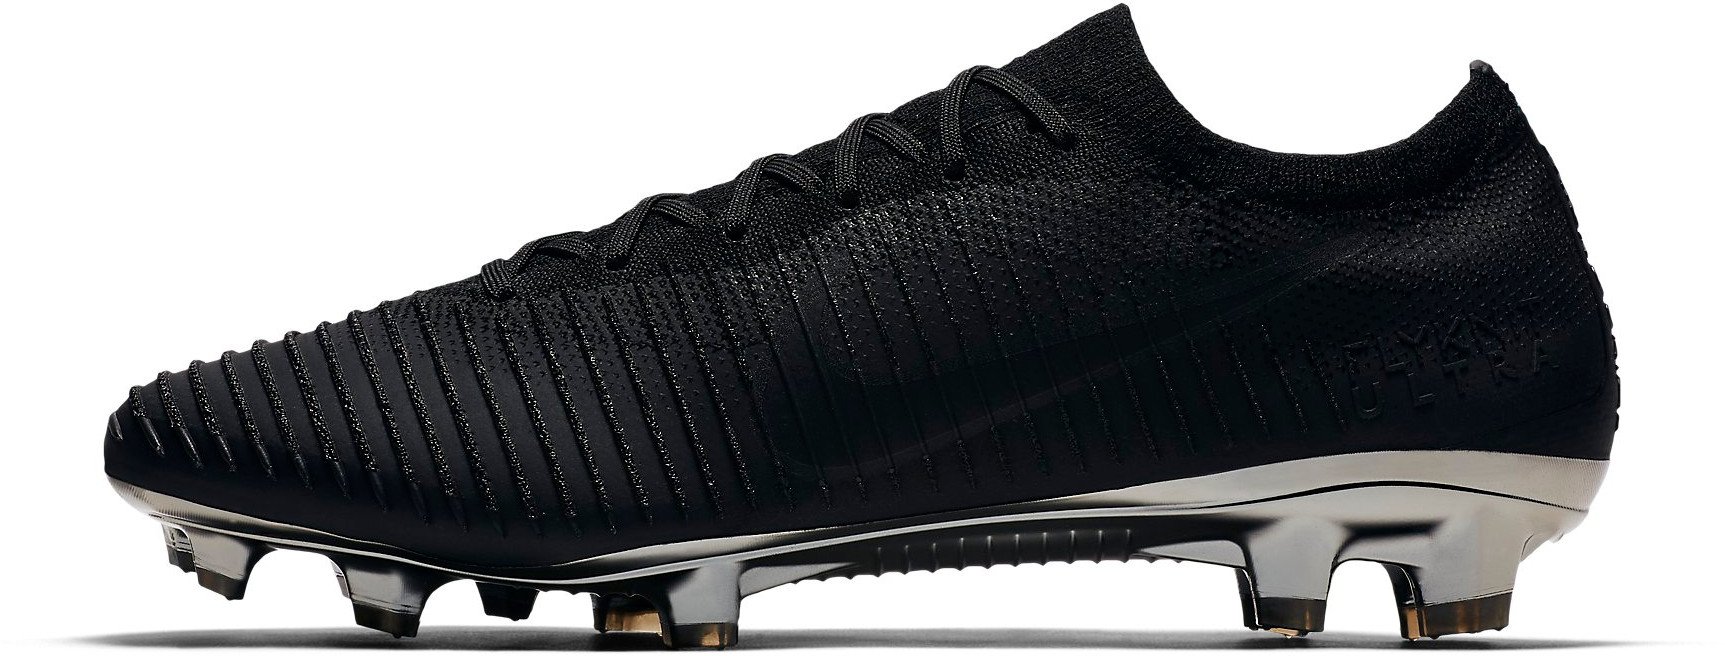 nike flyknit ultra football boots for sale